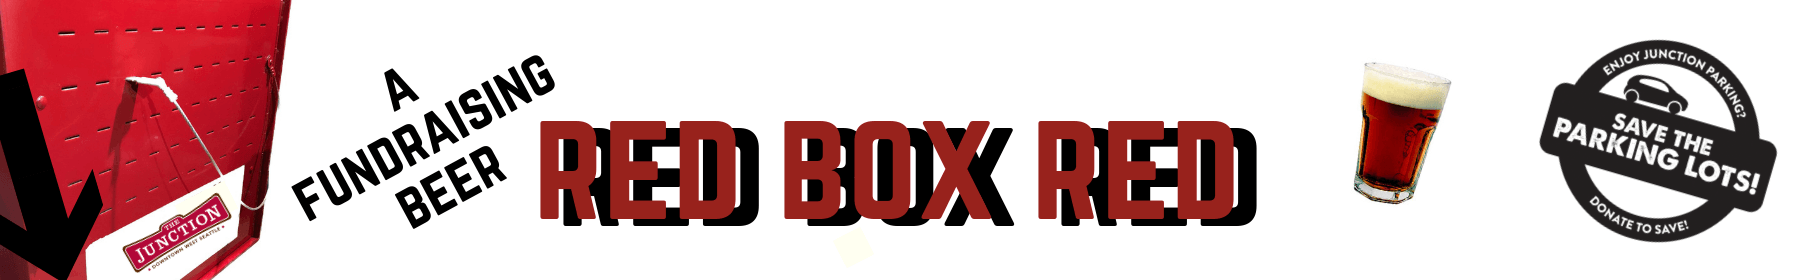 Red Box N Logo - Raise Your Glass for a Pint of Red Box Red